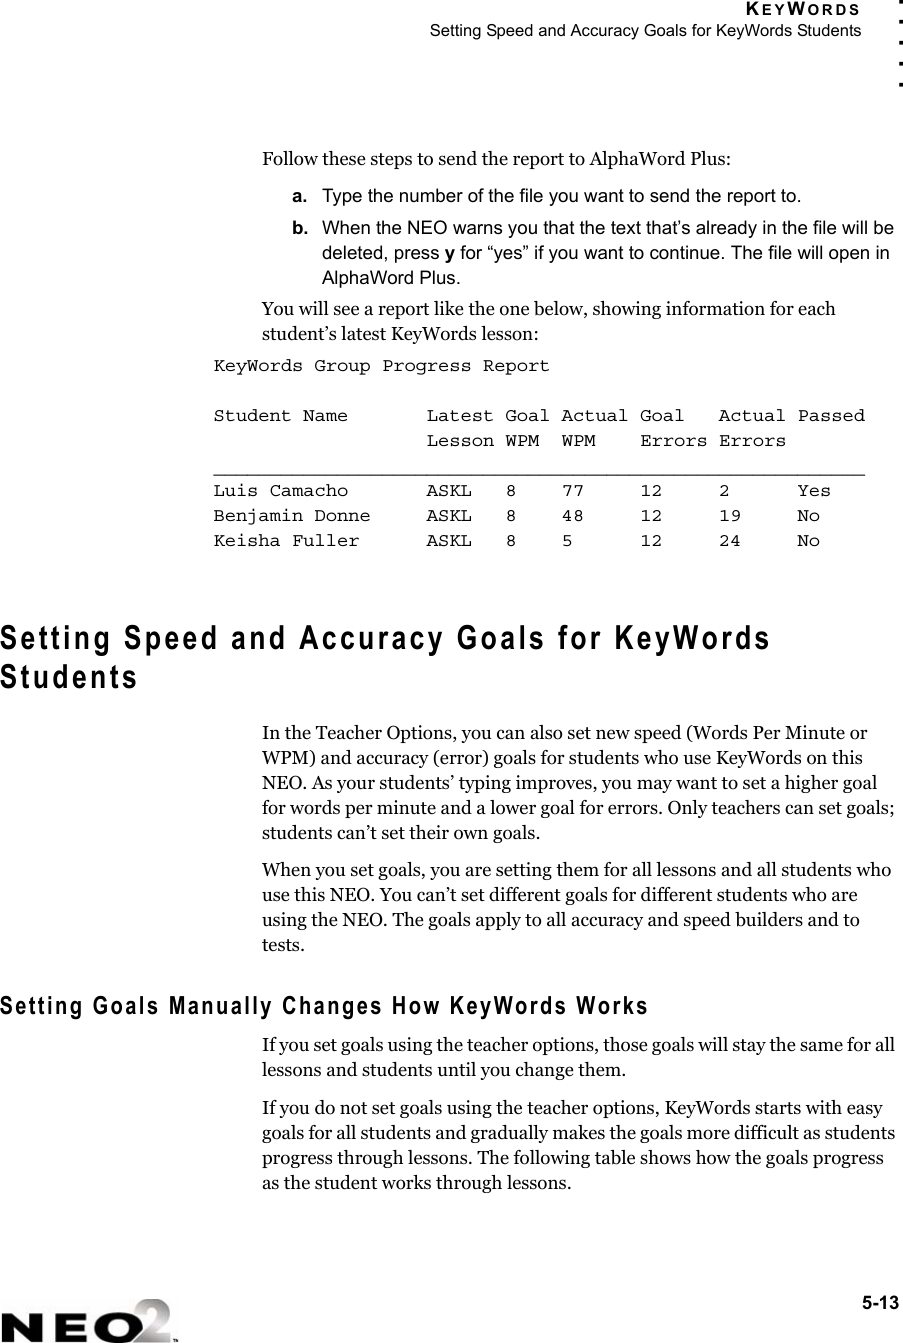 KEYWORDSSetting Speed and Accuracy Goals for KeyWords Students5-13. . . . .Follow these steps to send the report to AlphaWord Plus:a. Type the number of the file you want to send the report to.b. When the NEO warns you that the text that’s already in the file will be deleted, press y for “yes” if you want to continue. The file will open in AlphaWord Plus.You will see a report like the one below, showing information for each student’s latest KeyWords lesson:Setting Speed and Accuracy Goals for KeyWords StudentsIn the Teacher Options, you can also set new speed (Words Per Minute or WPM) and accuracy (error) goals for students who use KeyWords on this NEO. As your students’ typing improves, you may want to set a higher goal for words per minute and a lower goal for errors. Only teachers can set goals; students can’t set their own goals.When you set goals, you are setting them for all lessons and all students who use this NEO. You can’t set different goals for different students who are using the NEO. The goals apply to all accuracy and speed builders and to tests. Setting Goals Manually Changes How KeyWords WorksIf you set goals using the teacher options, those goals will stay the same for all lessons and students until you change them.If you do not set goals using the teacher options, KeyWords starts with easy goals for all students and gradually makes the goals more difficult as students progress through lessons. The following table shows how the goals progress as the student works through lessons.KeyWords Group Progress ReportStudent Name       Latest Goal Actual Goal   Actual Passed                   Lesson WPM  WPM    Errors Errors       __________________________________________________________Luis Camacho       ASKL   8    77     12     2      Yes  Benjamin Donne     ASKL   8    48     12     19     No   Keisha Fuller      ASKL   8    5      12     24     No 